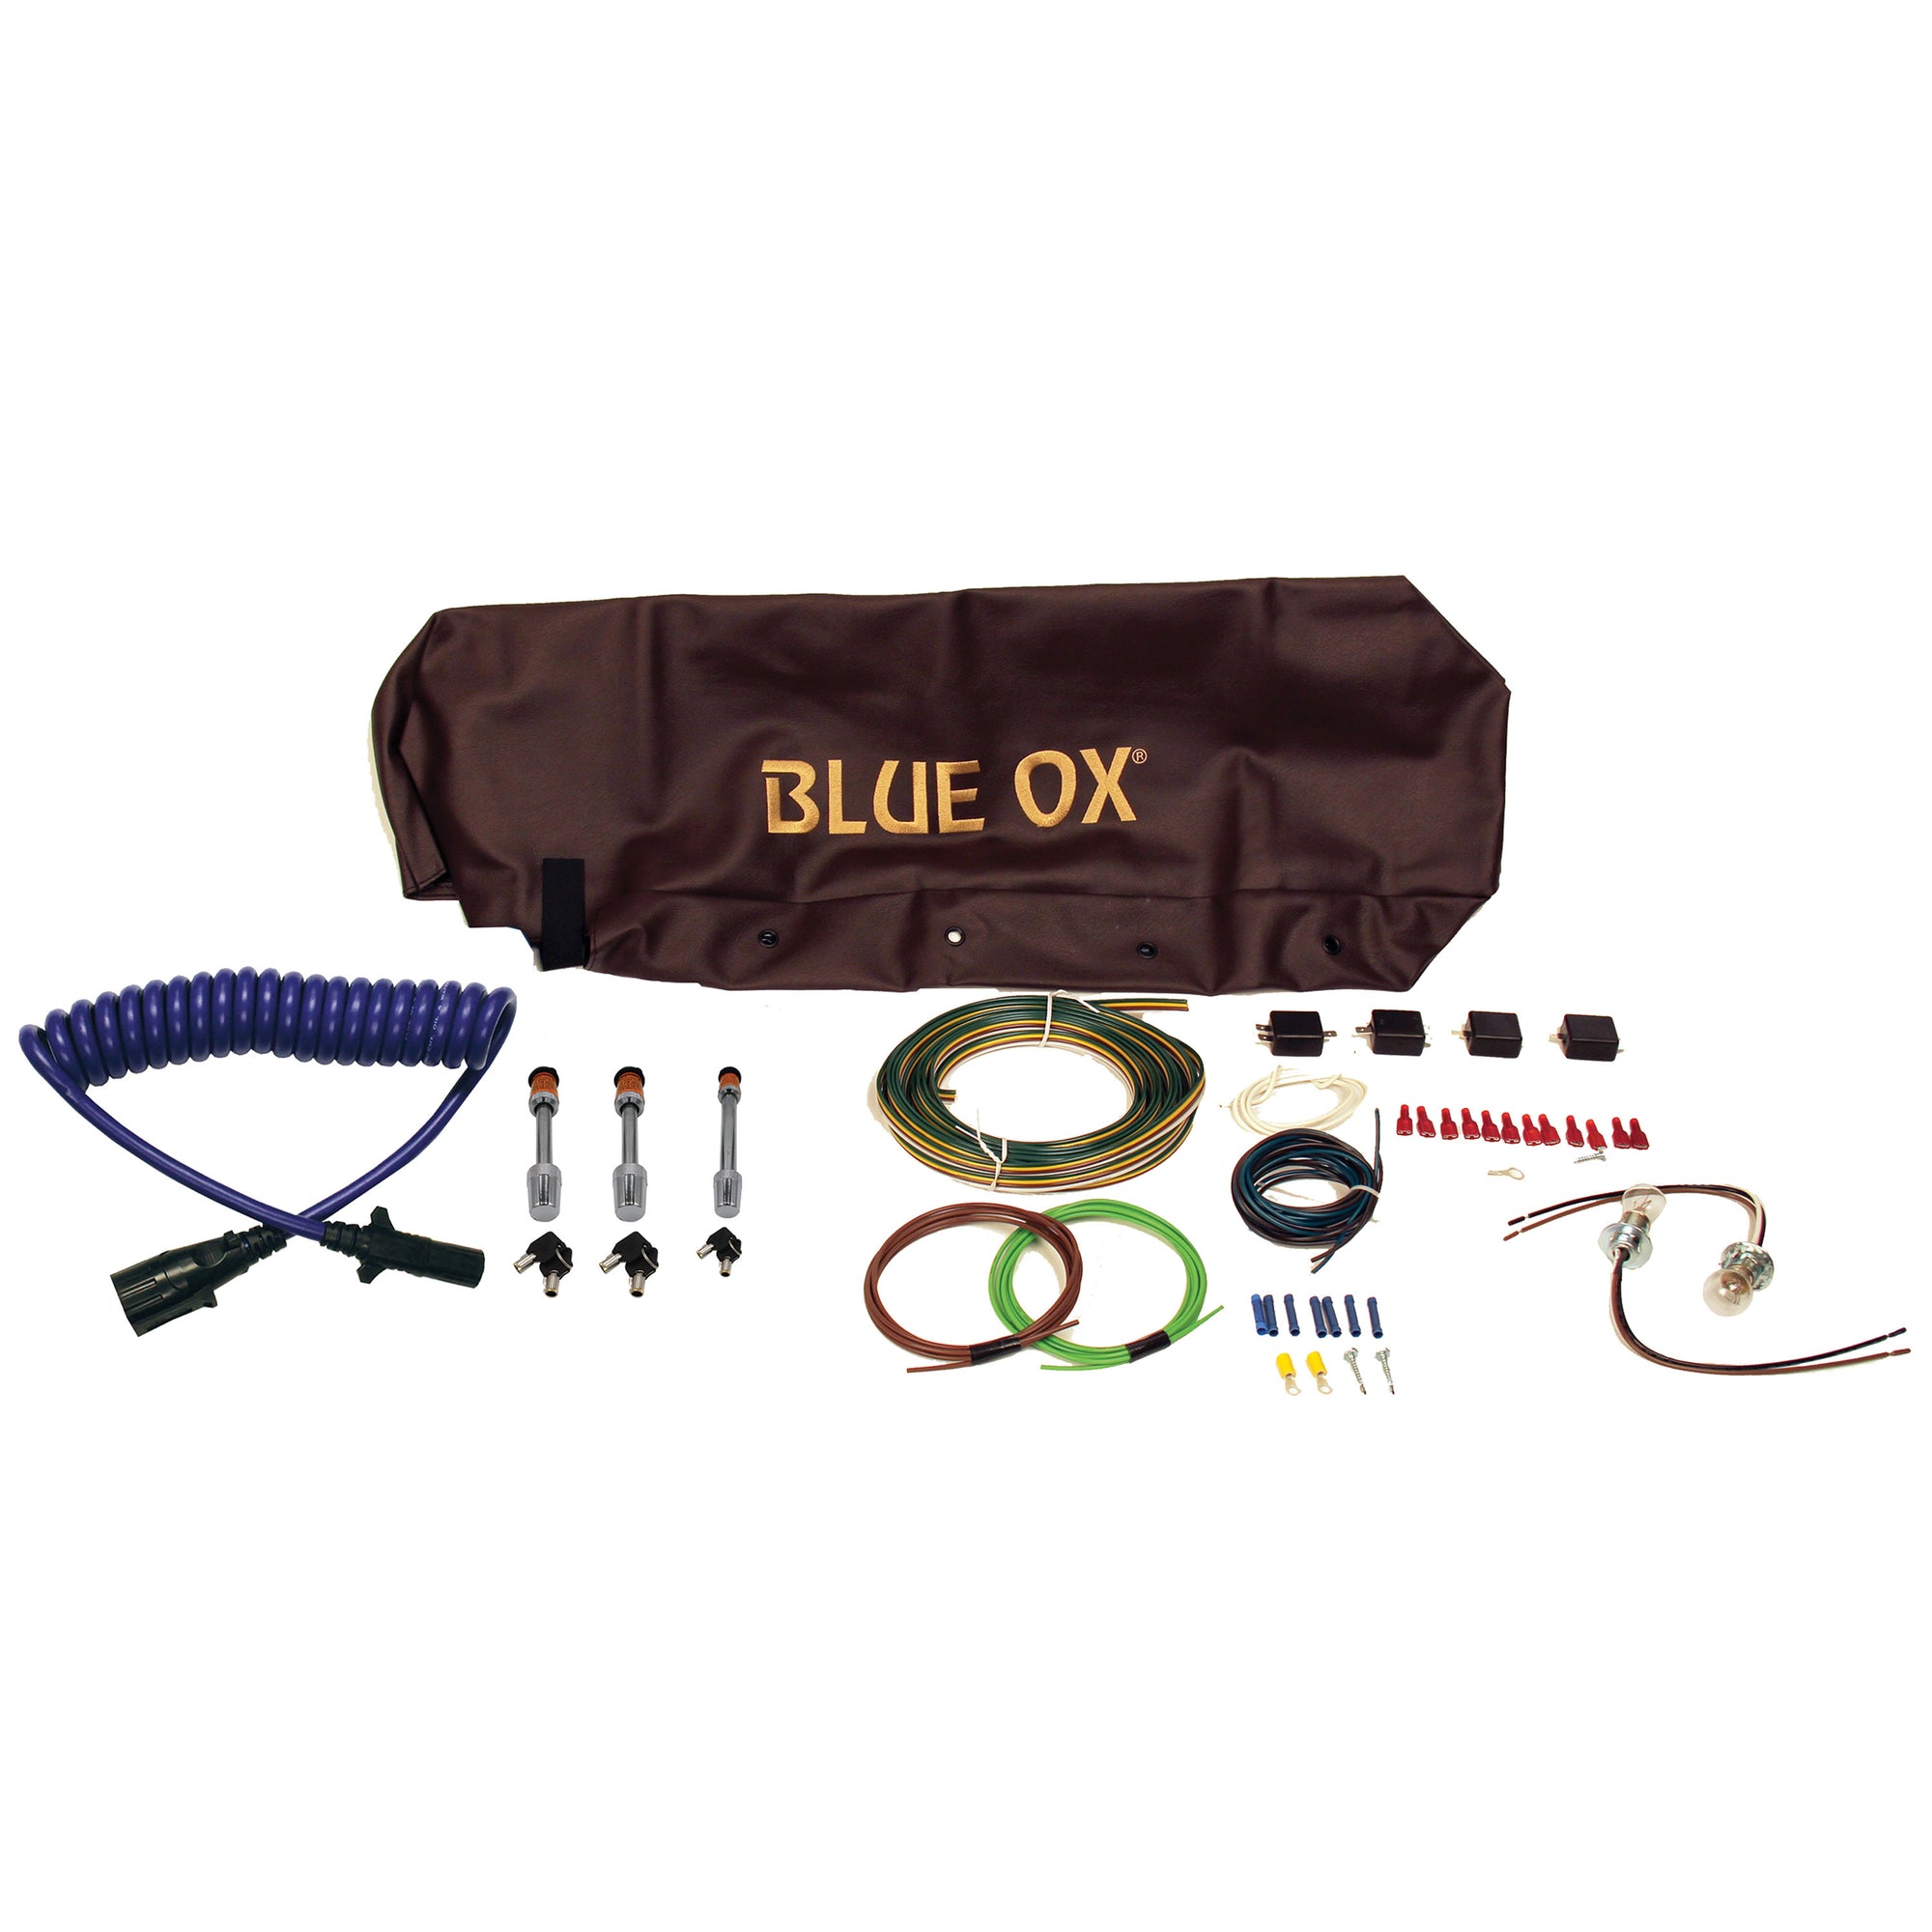 Blue Ox BX88363 Apollo Tow Accessory Kit - 7 to 6 Wire